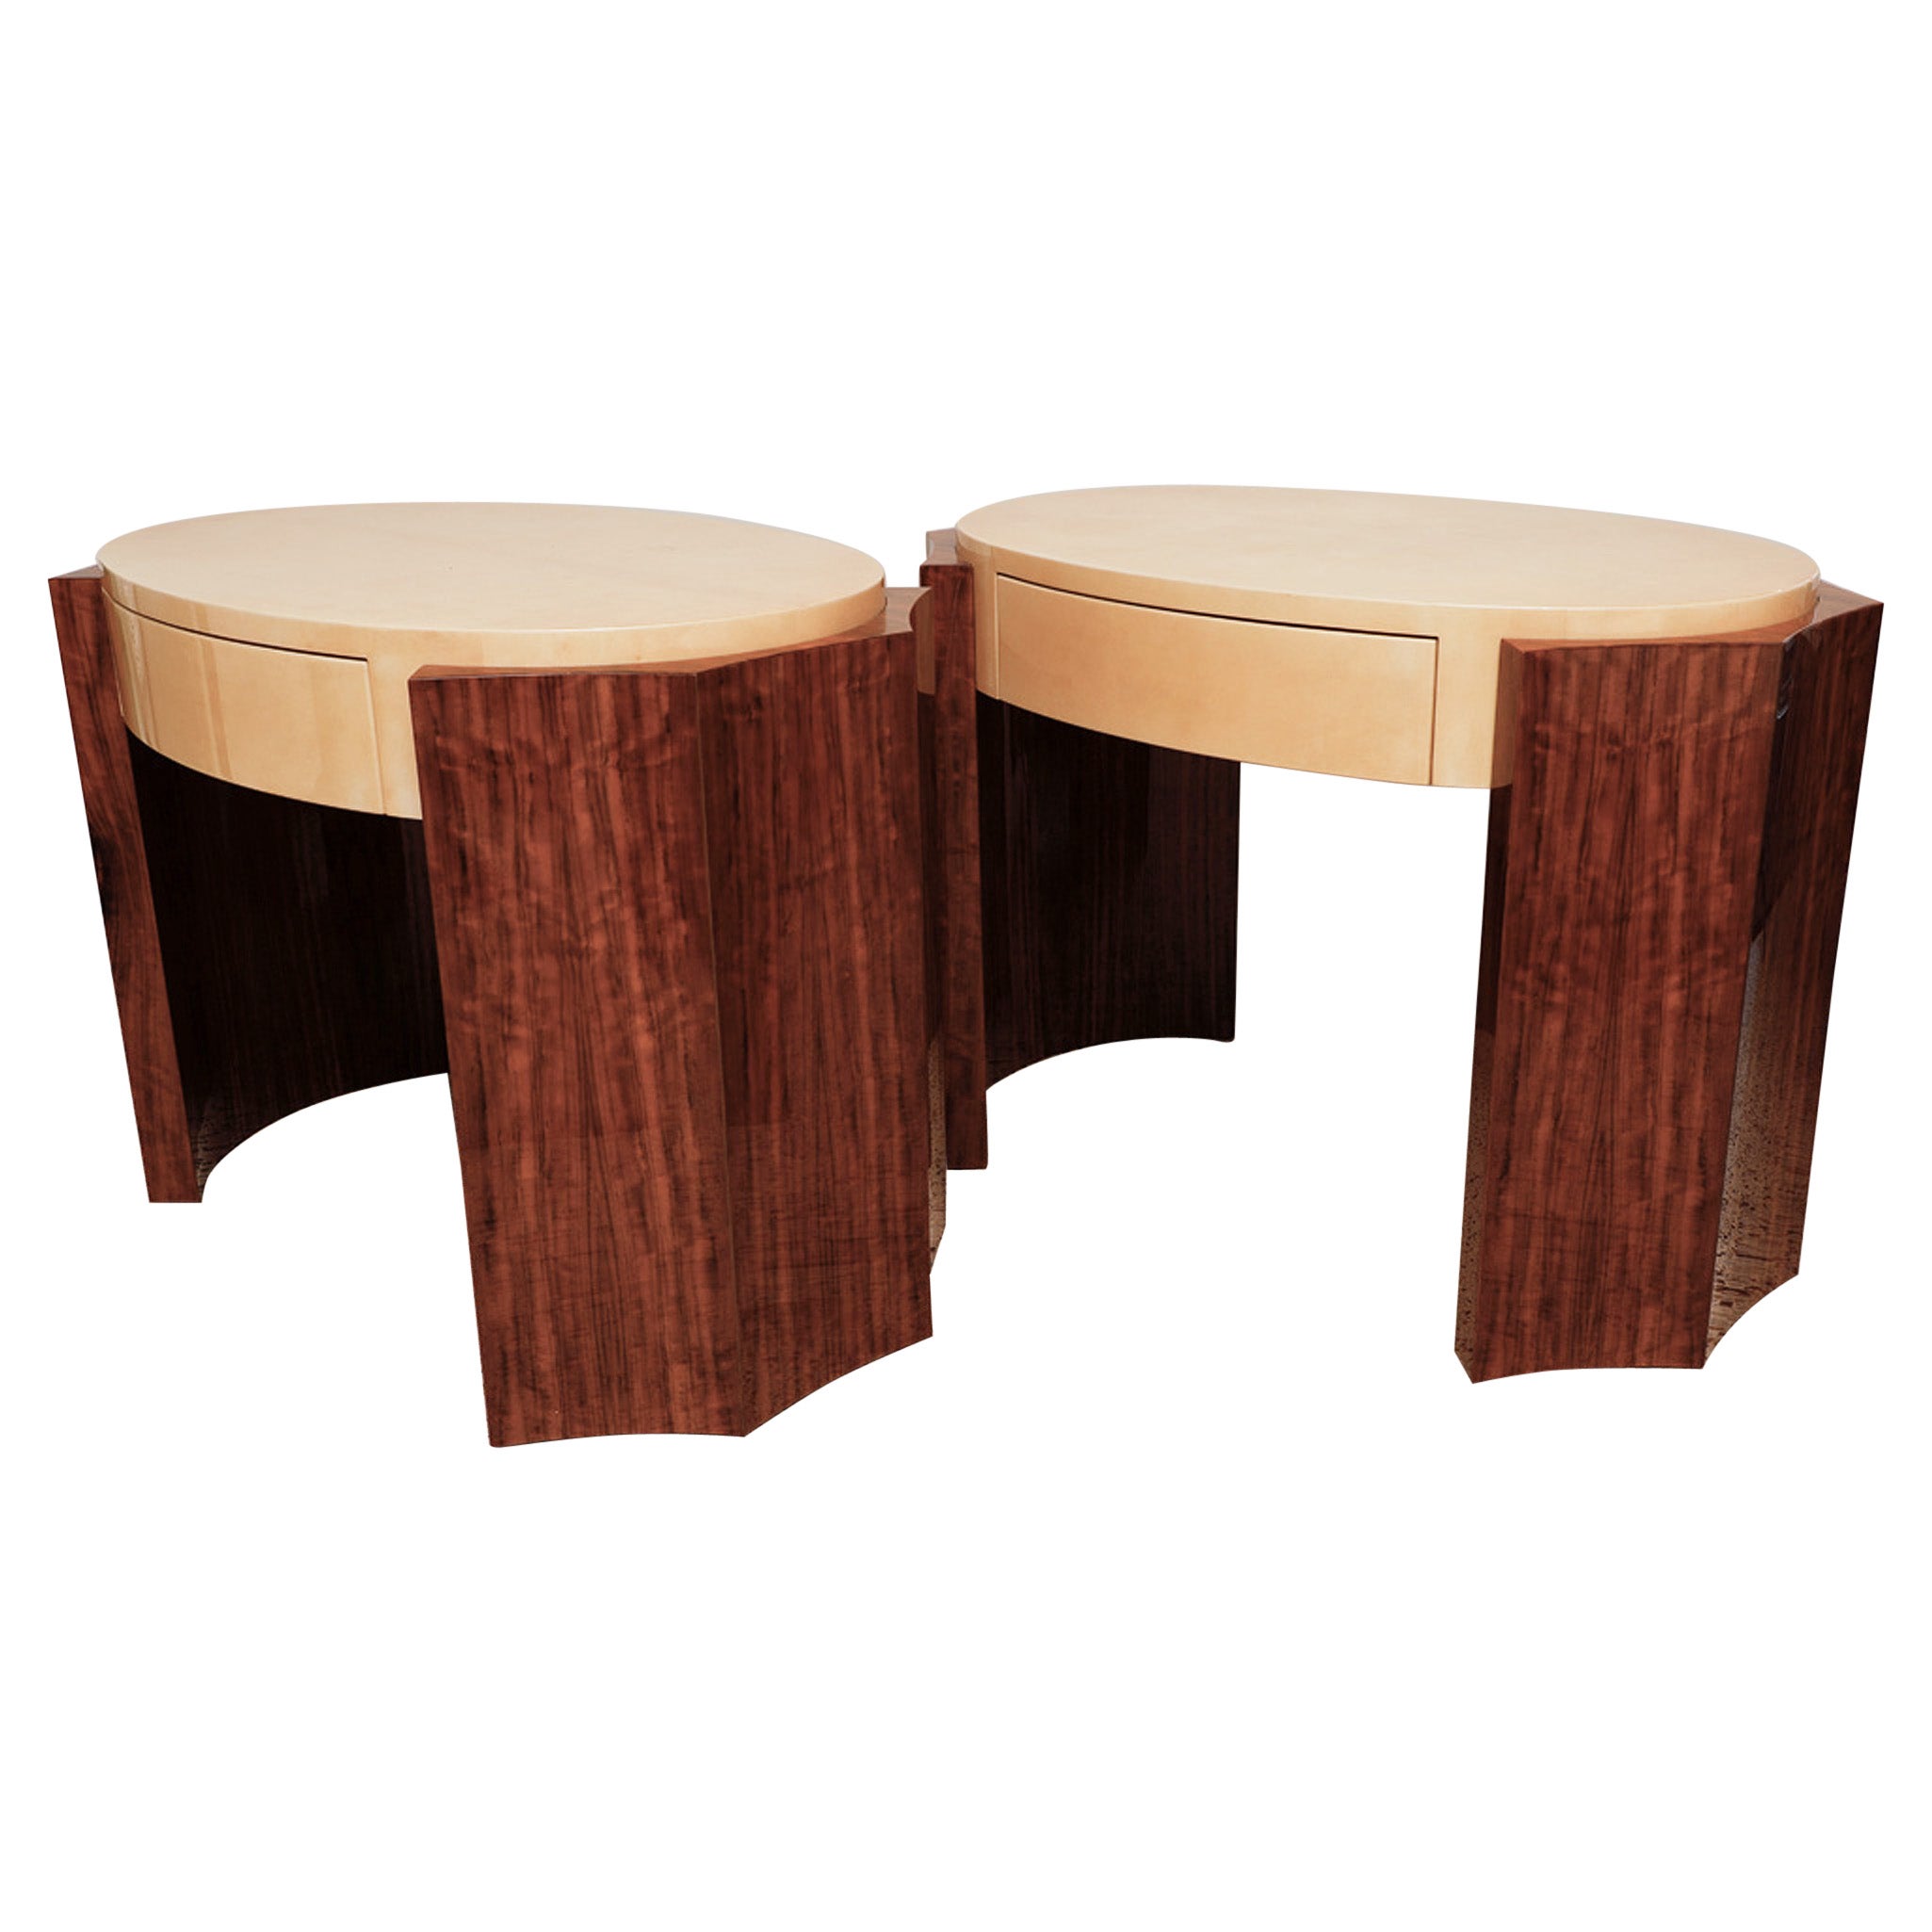 Large Pair of Lacquered Goatskin and Paldo Wood Nightstands